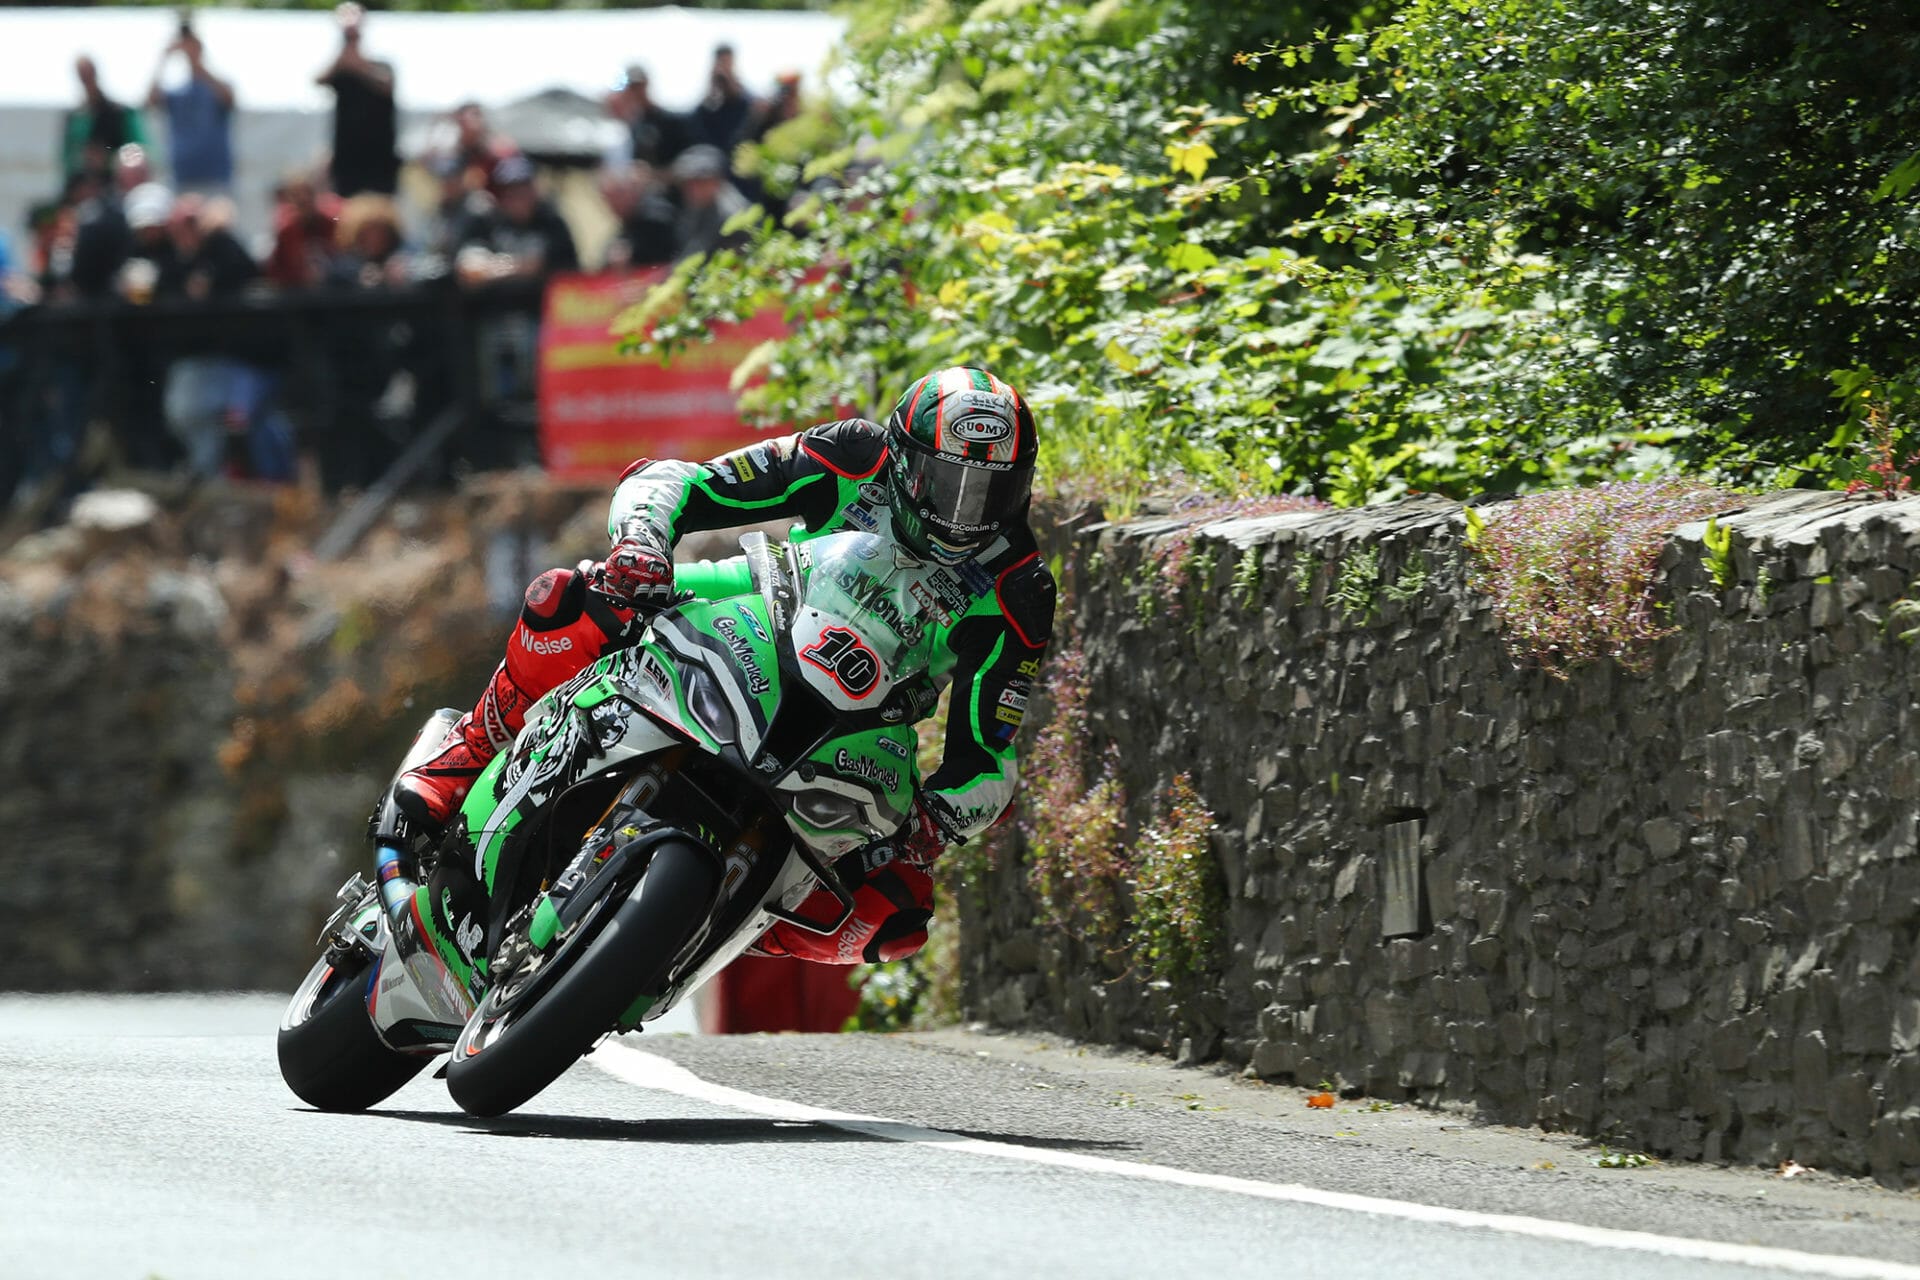 Top 20 Superbike riders confirmed for Isle of Man TT 2023